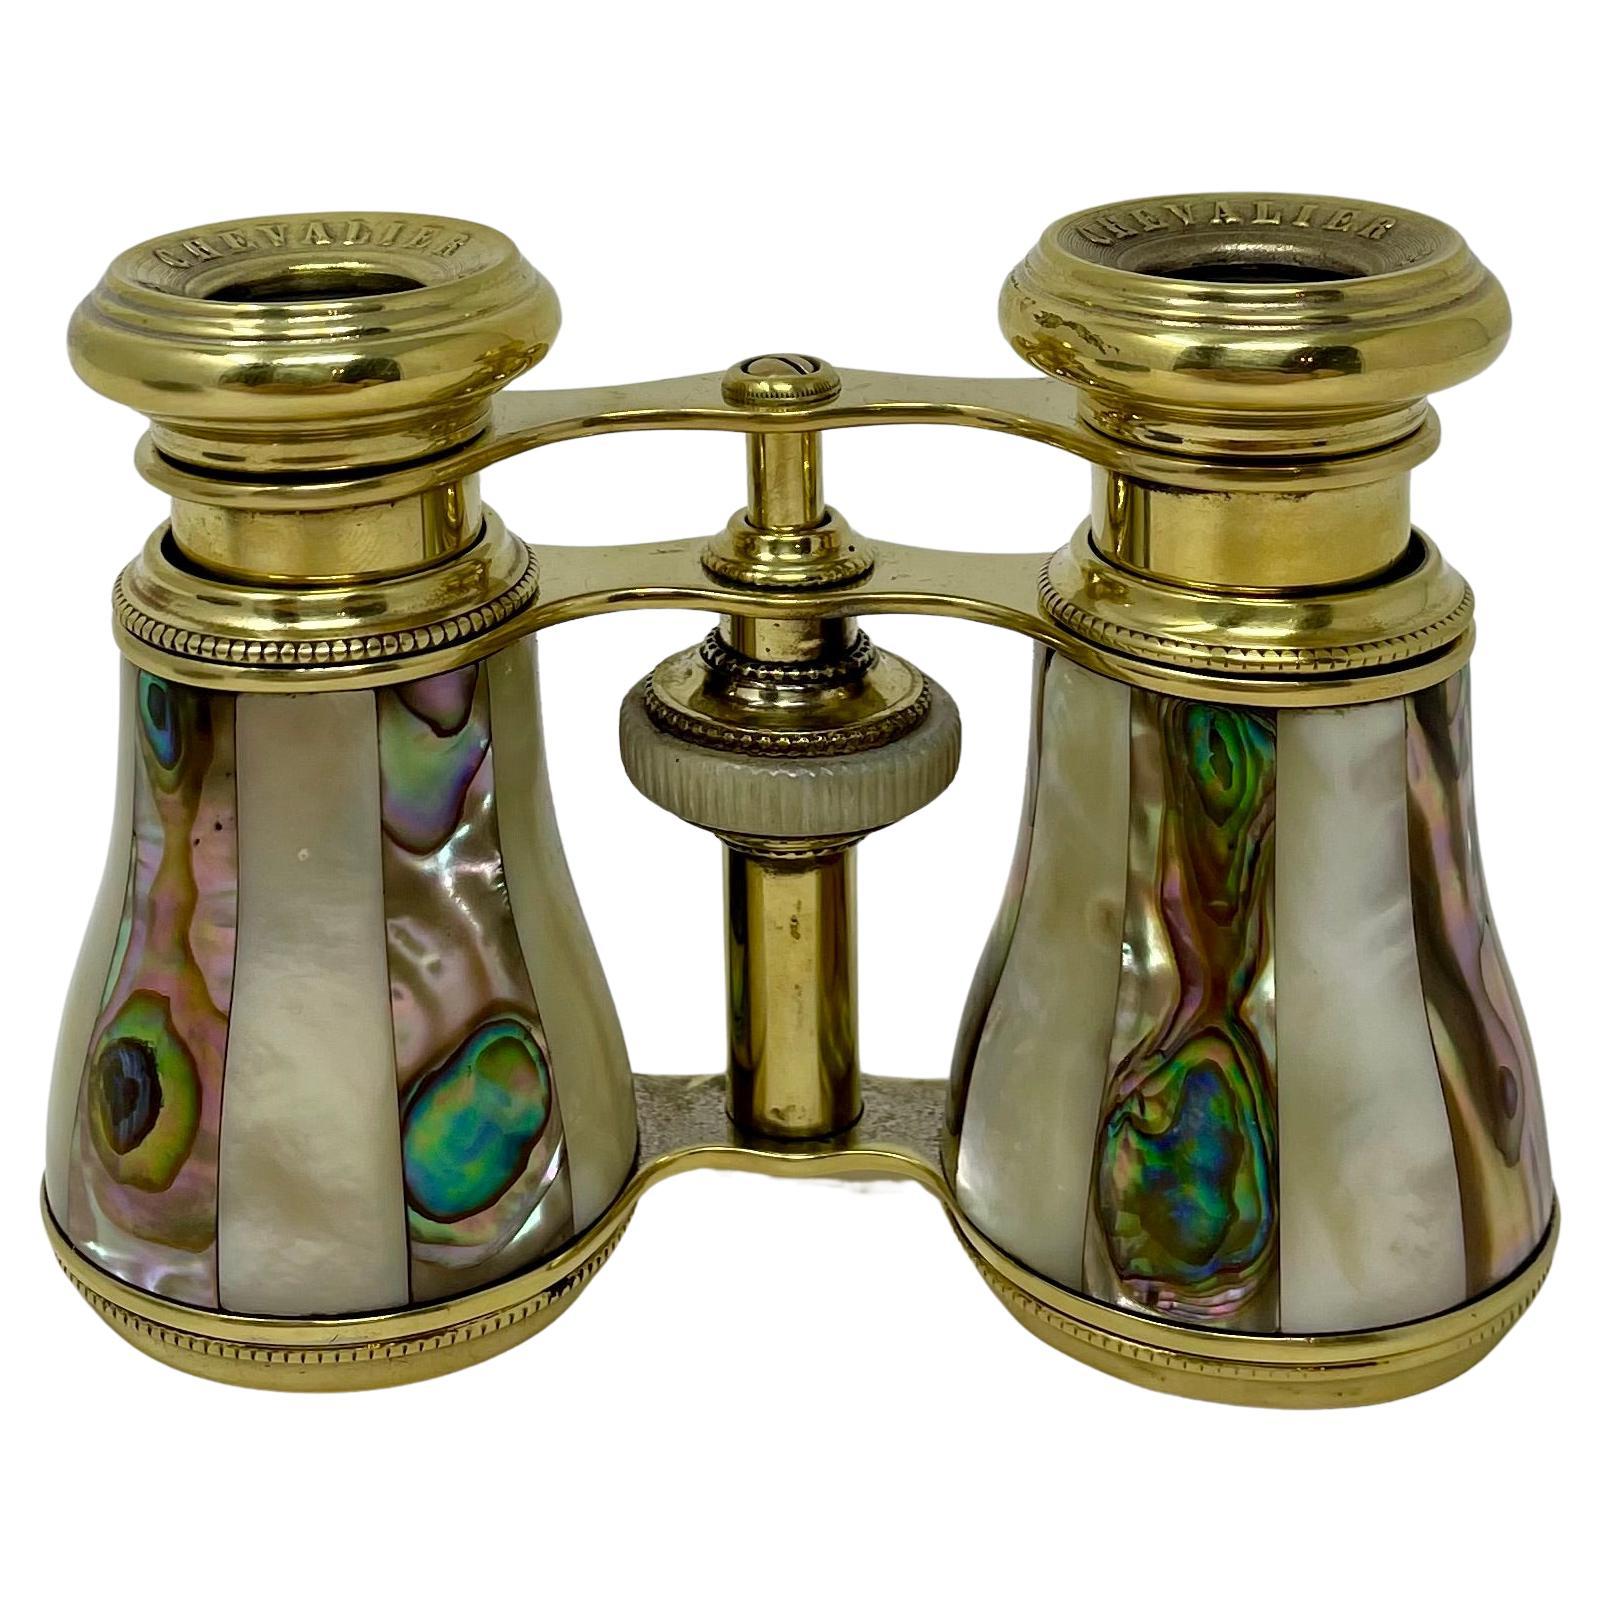 Antique French Parisian Mother-of-Pearl & Abalone Opera Glasses with Original Case, Circa 1890.